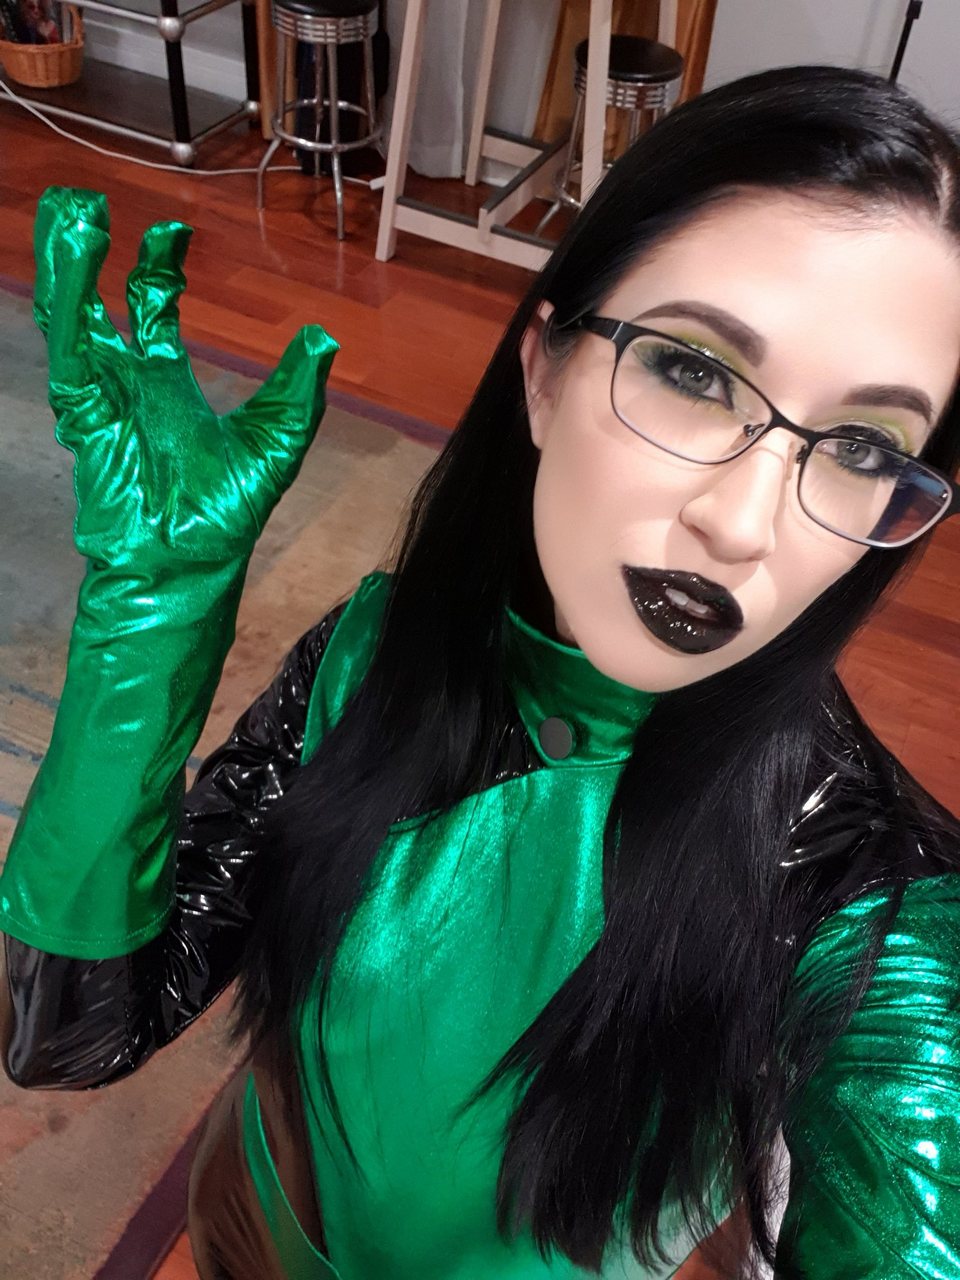 Shego From Kim Possible By Alex Coa